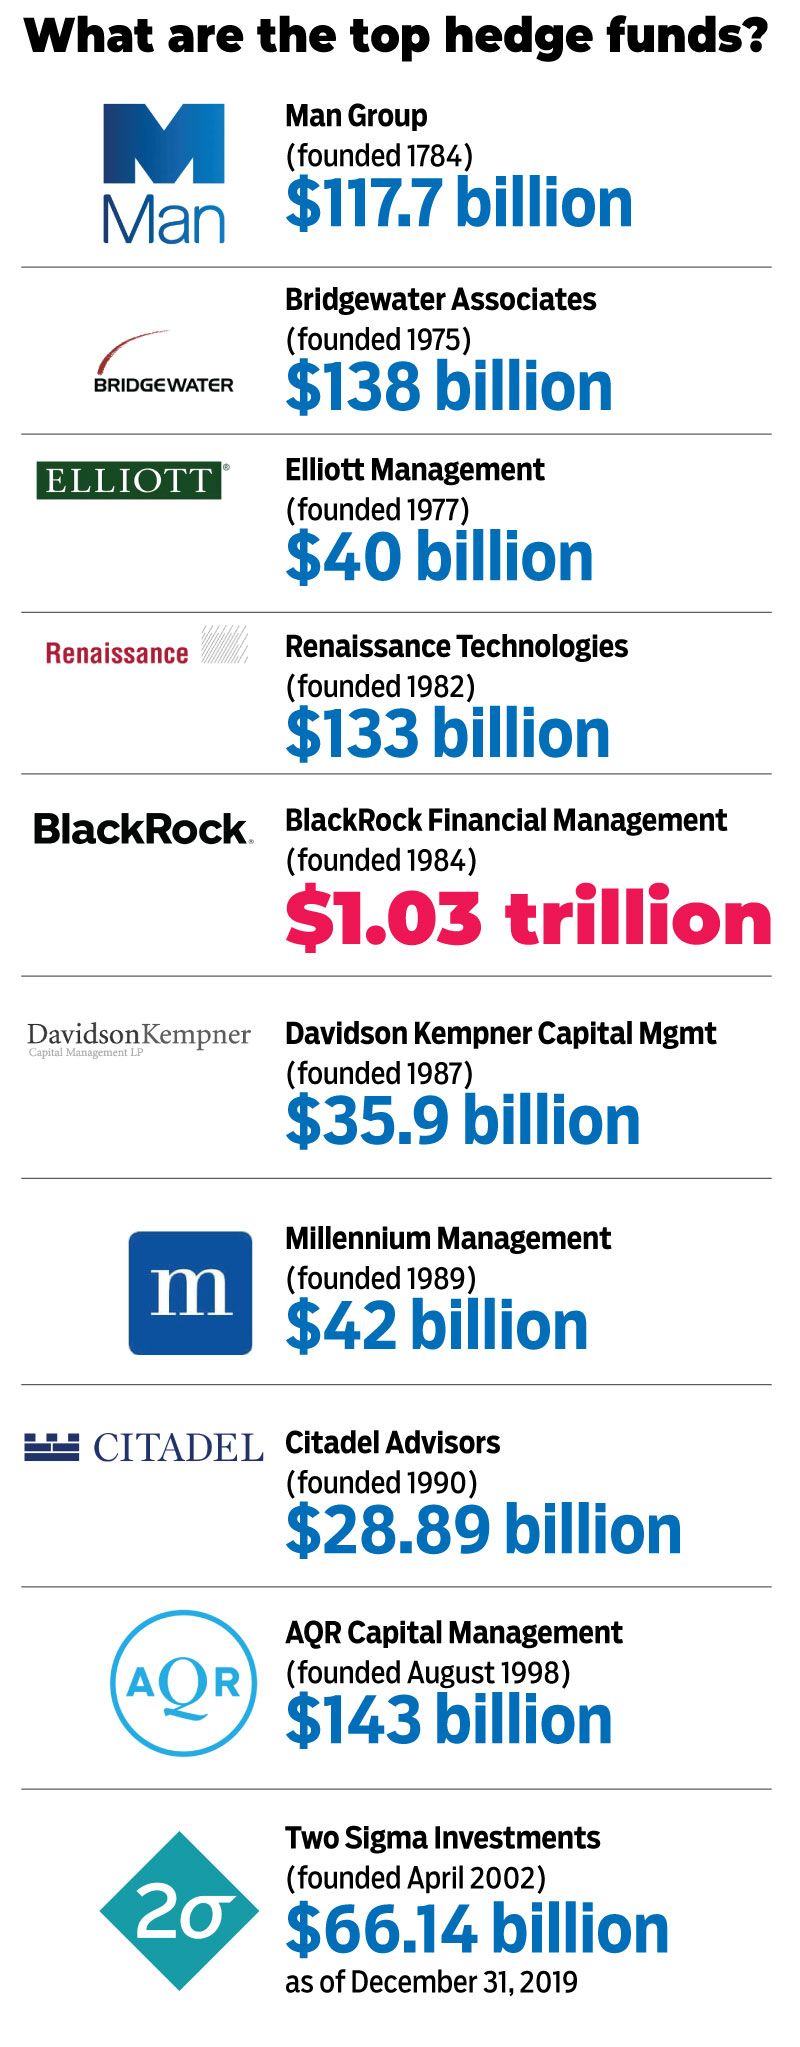 Top Hedge Funds